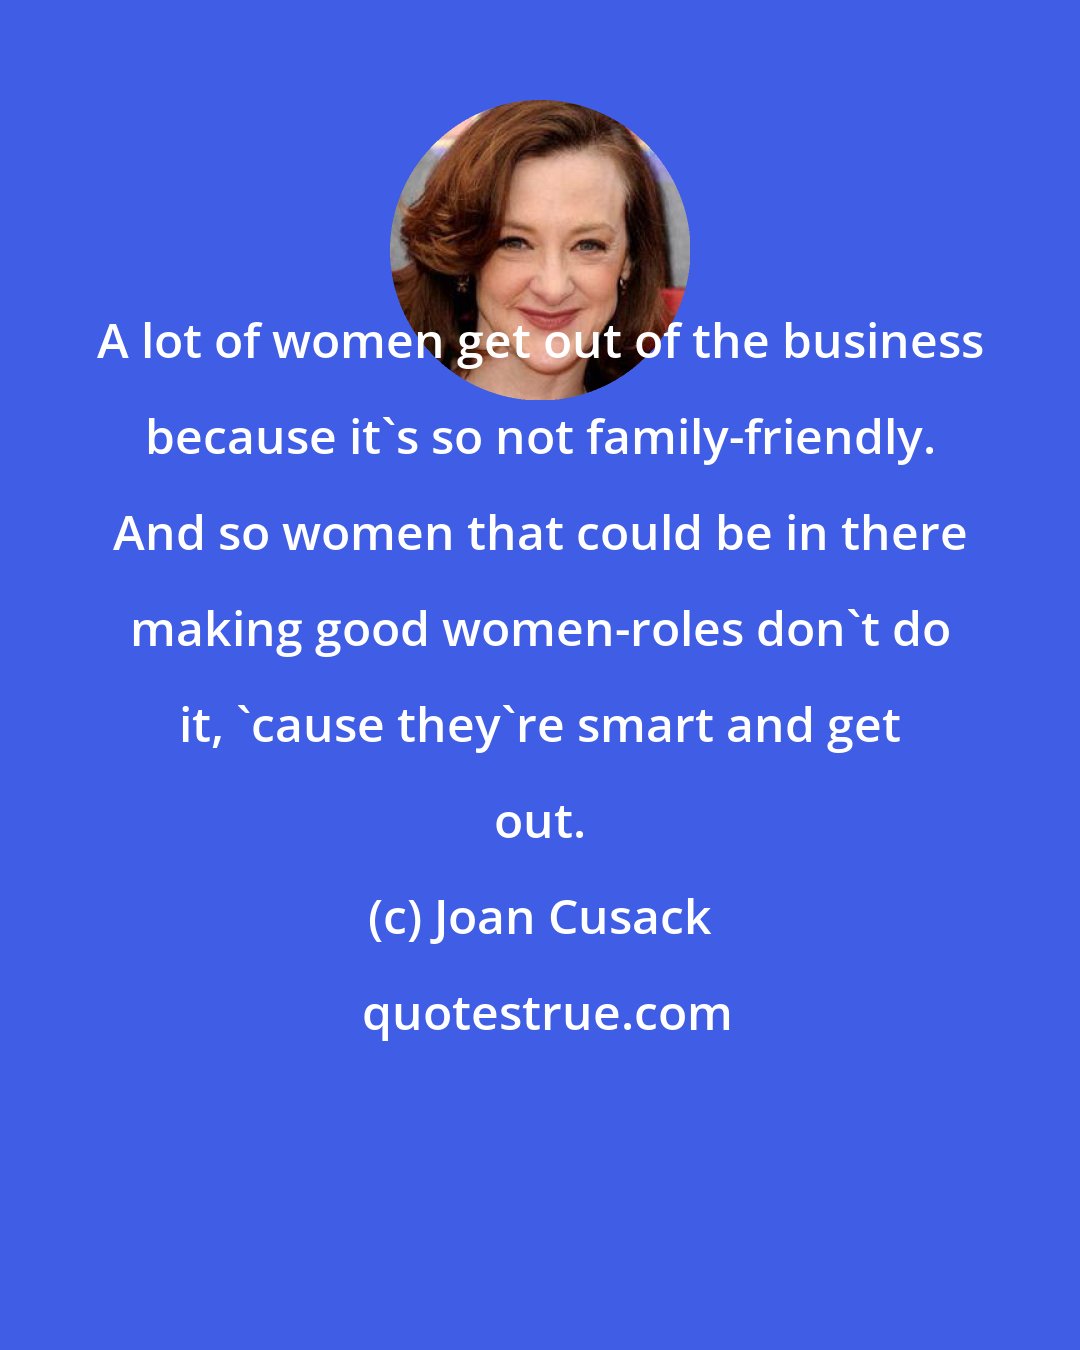 Joan Cusack: A lot of women get out of the business because it's so not family-friendly. And so women that could be in there making good women-roles don't do it, 'cause they're smart and get out.